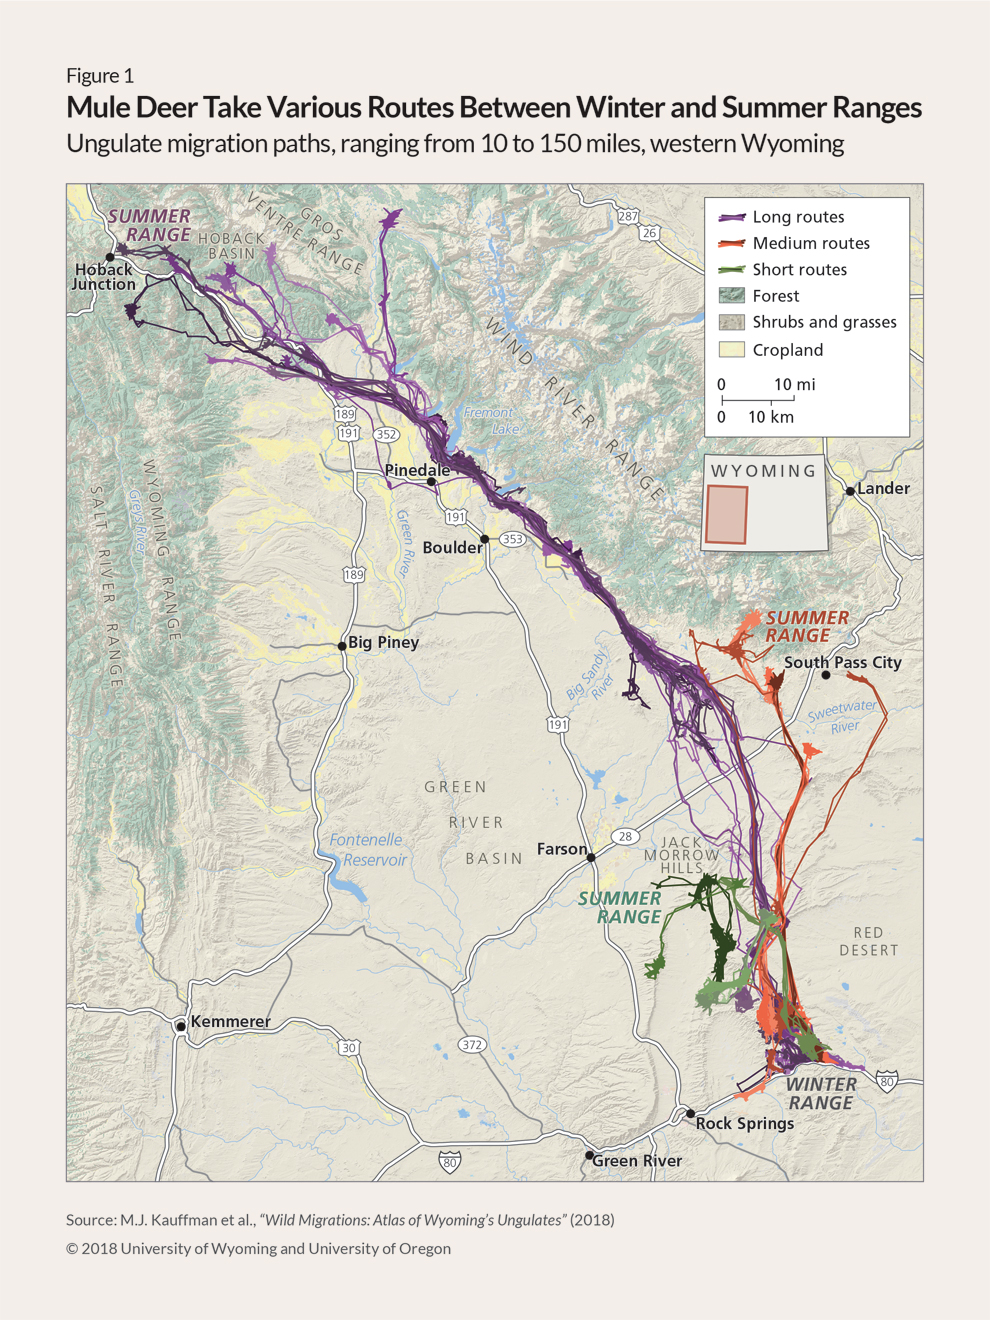 Map showing three paths—long, medium, and short—that mule deer take between their winter range in the Red Desert near Rock Springs, Wyoming, and three summer ranges. The long path, shown in purple, runs 150 miles to Hoback Rim, south of Jackson, Wyoming, with deer that follow this route dispersing to various areas around the high country in the Wind River and Wyoming Range mountains. The medium path, in orange, ends near South Pass City, and the short route, in green, leads to the southern end of the Wind River Range. 